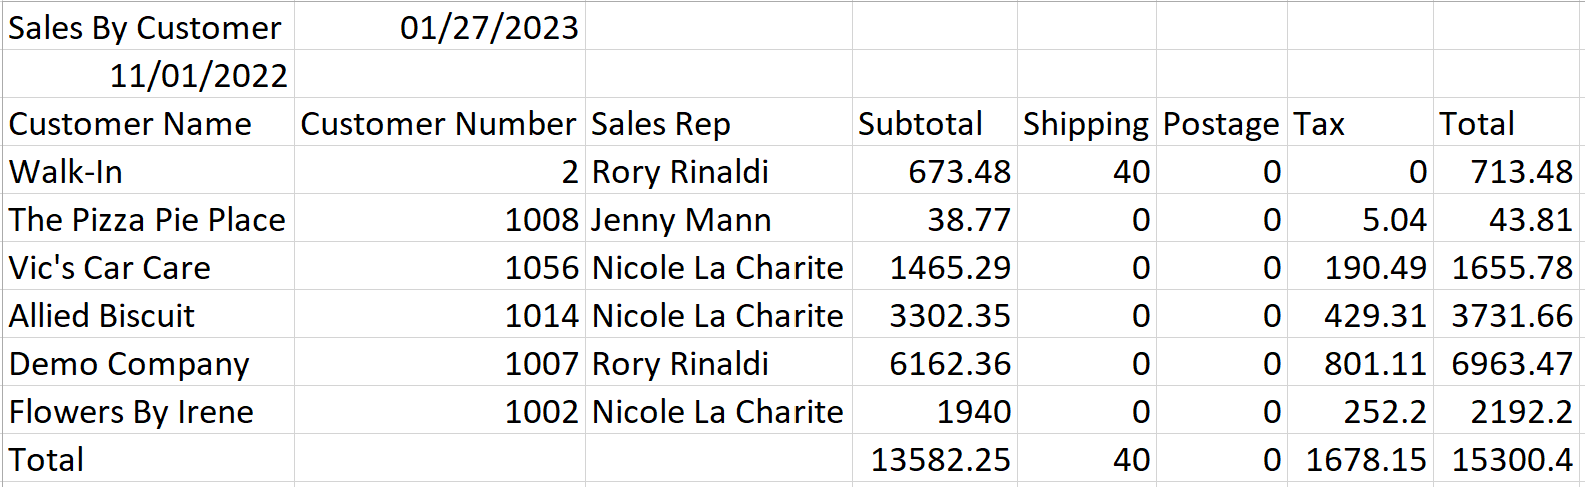 Sales by Customer